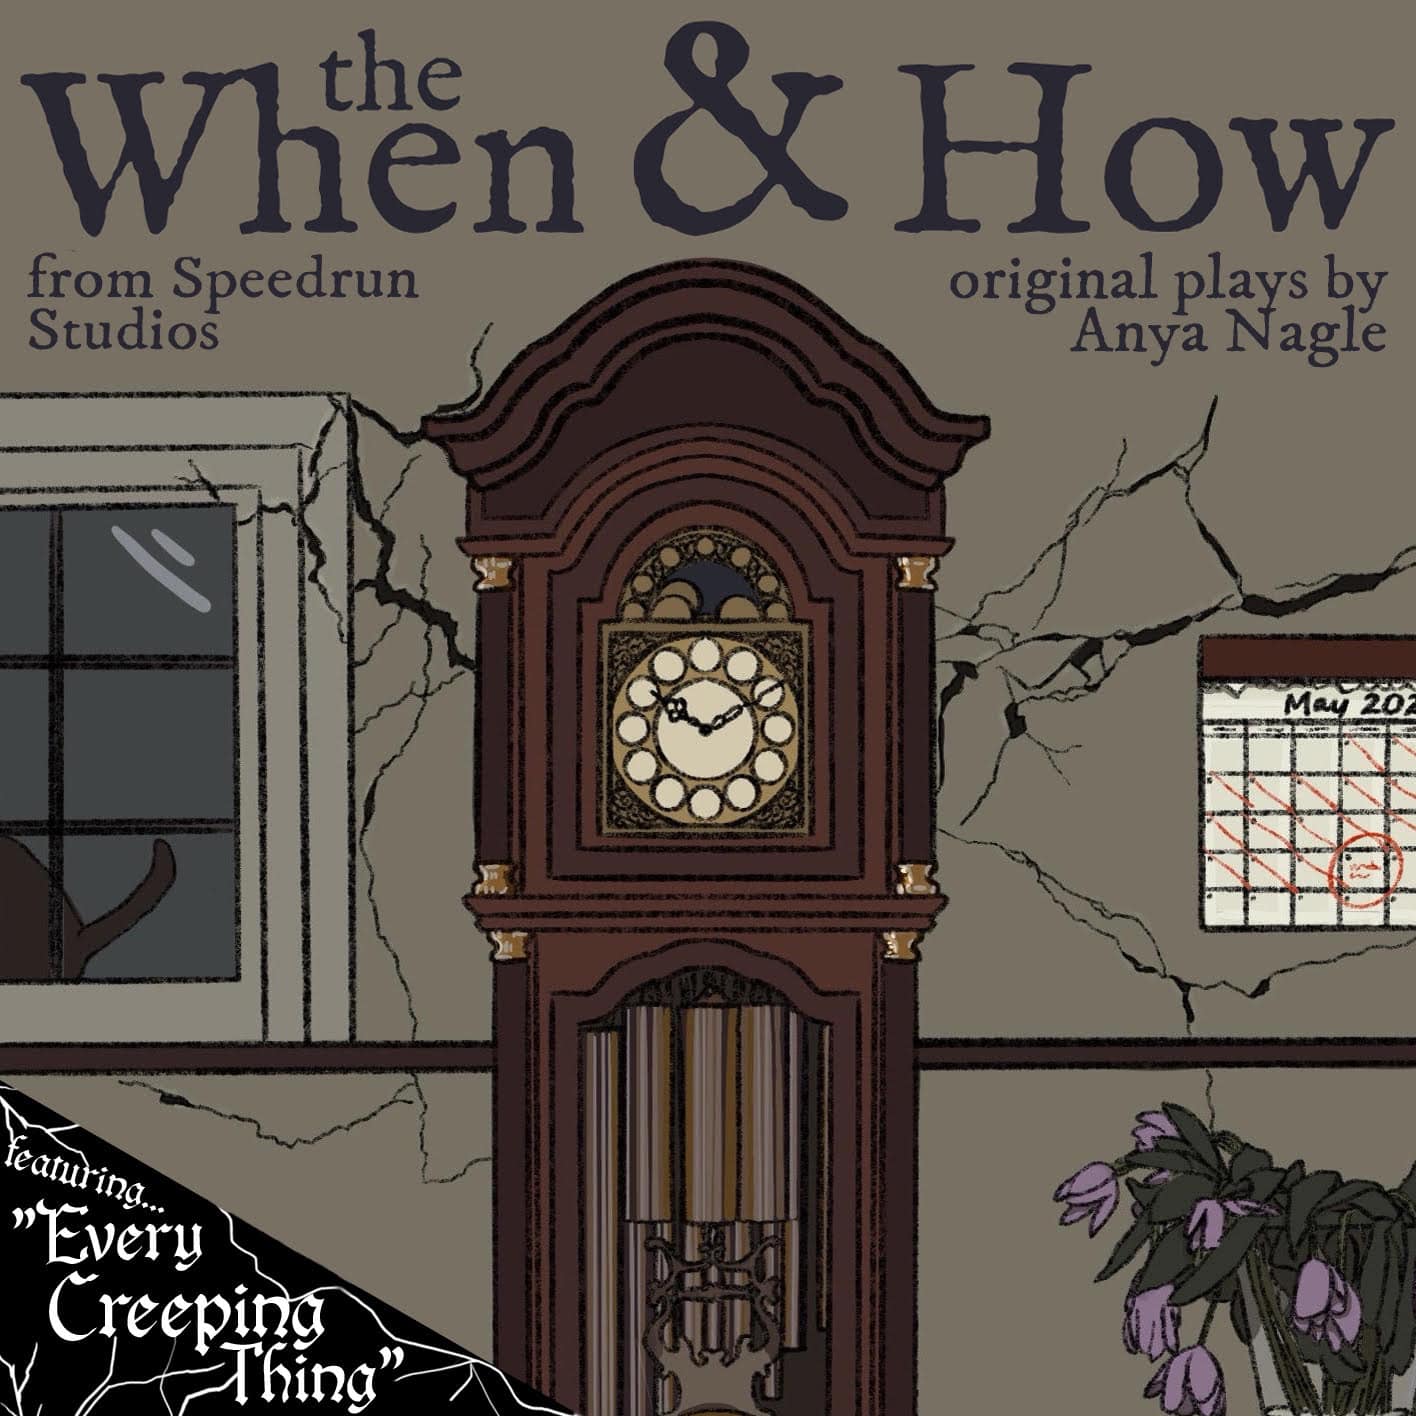 Every Creeping Thing AND the when & how by Speedrun Studios